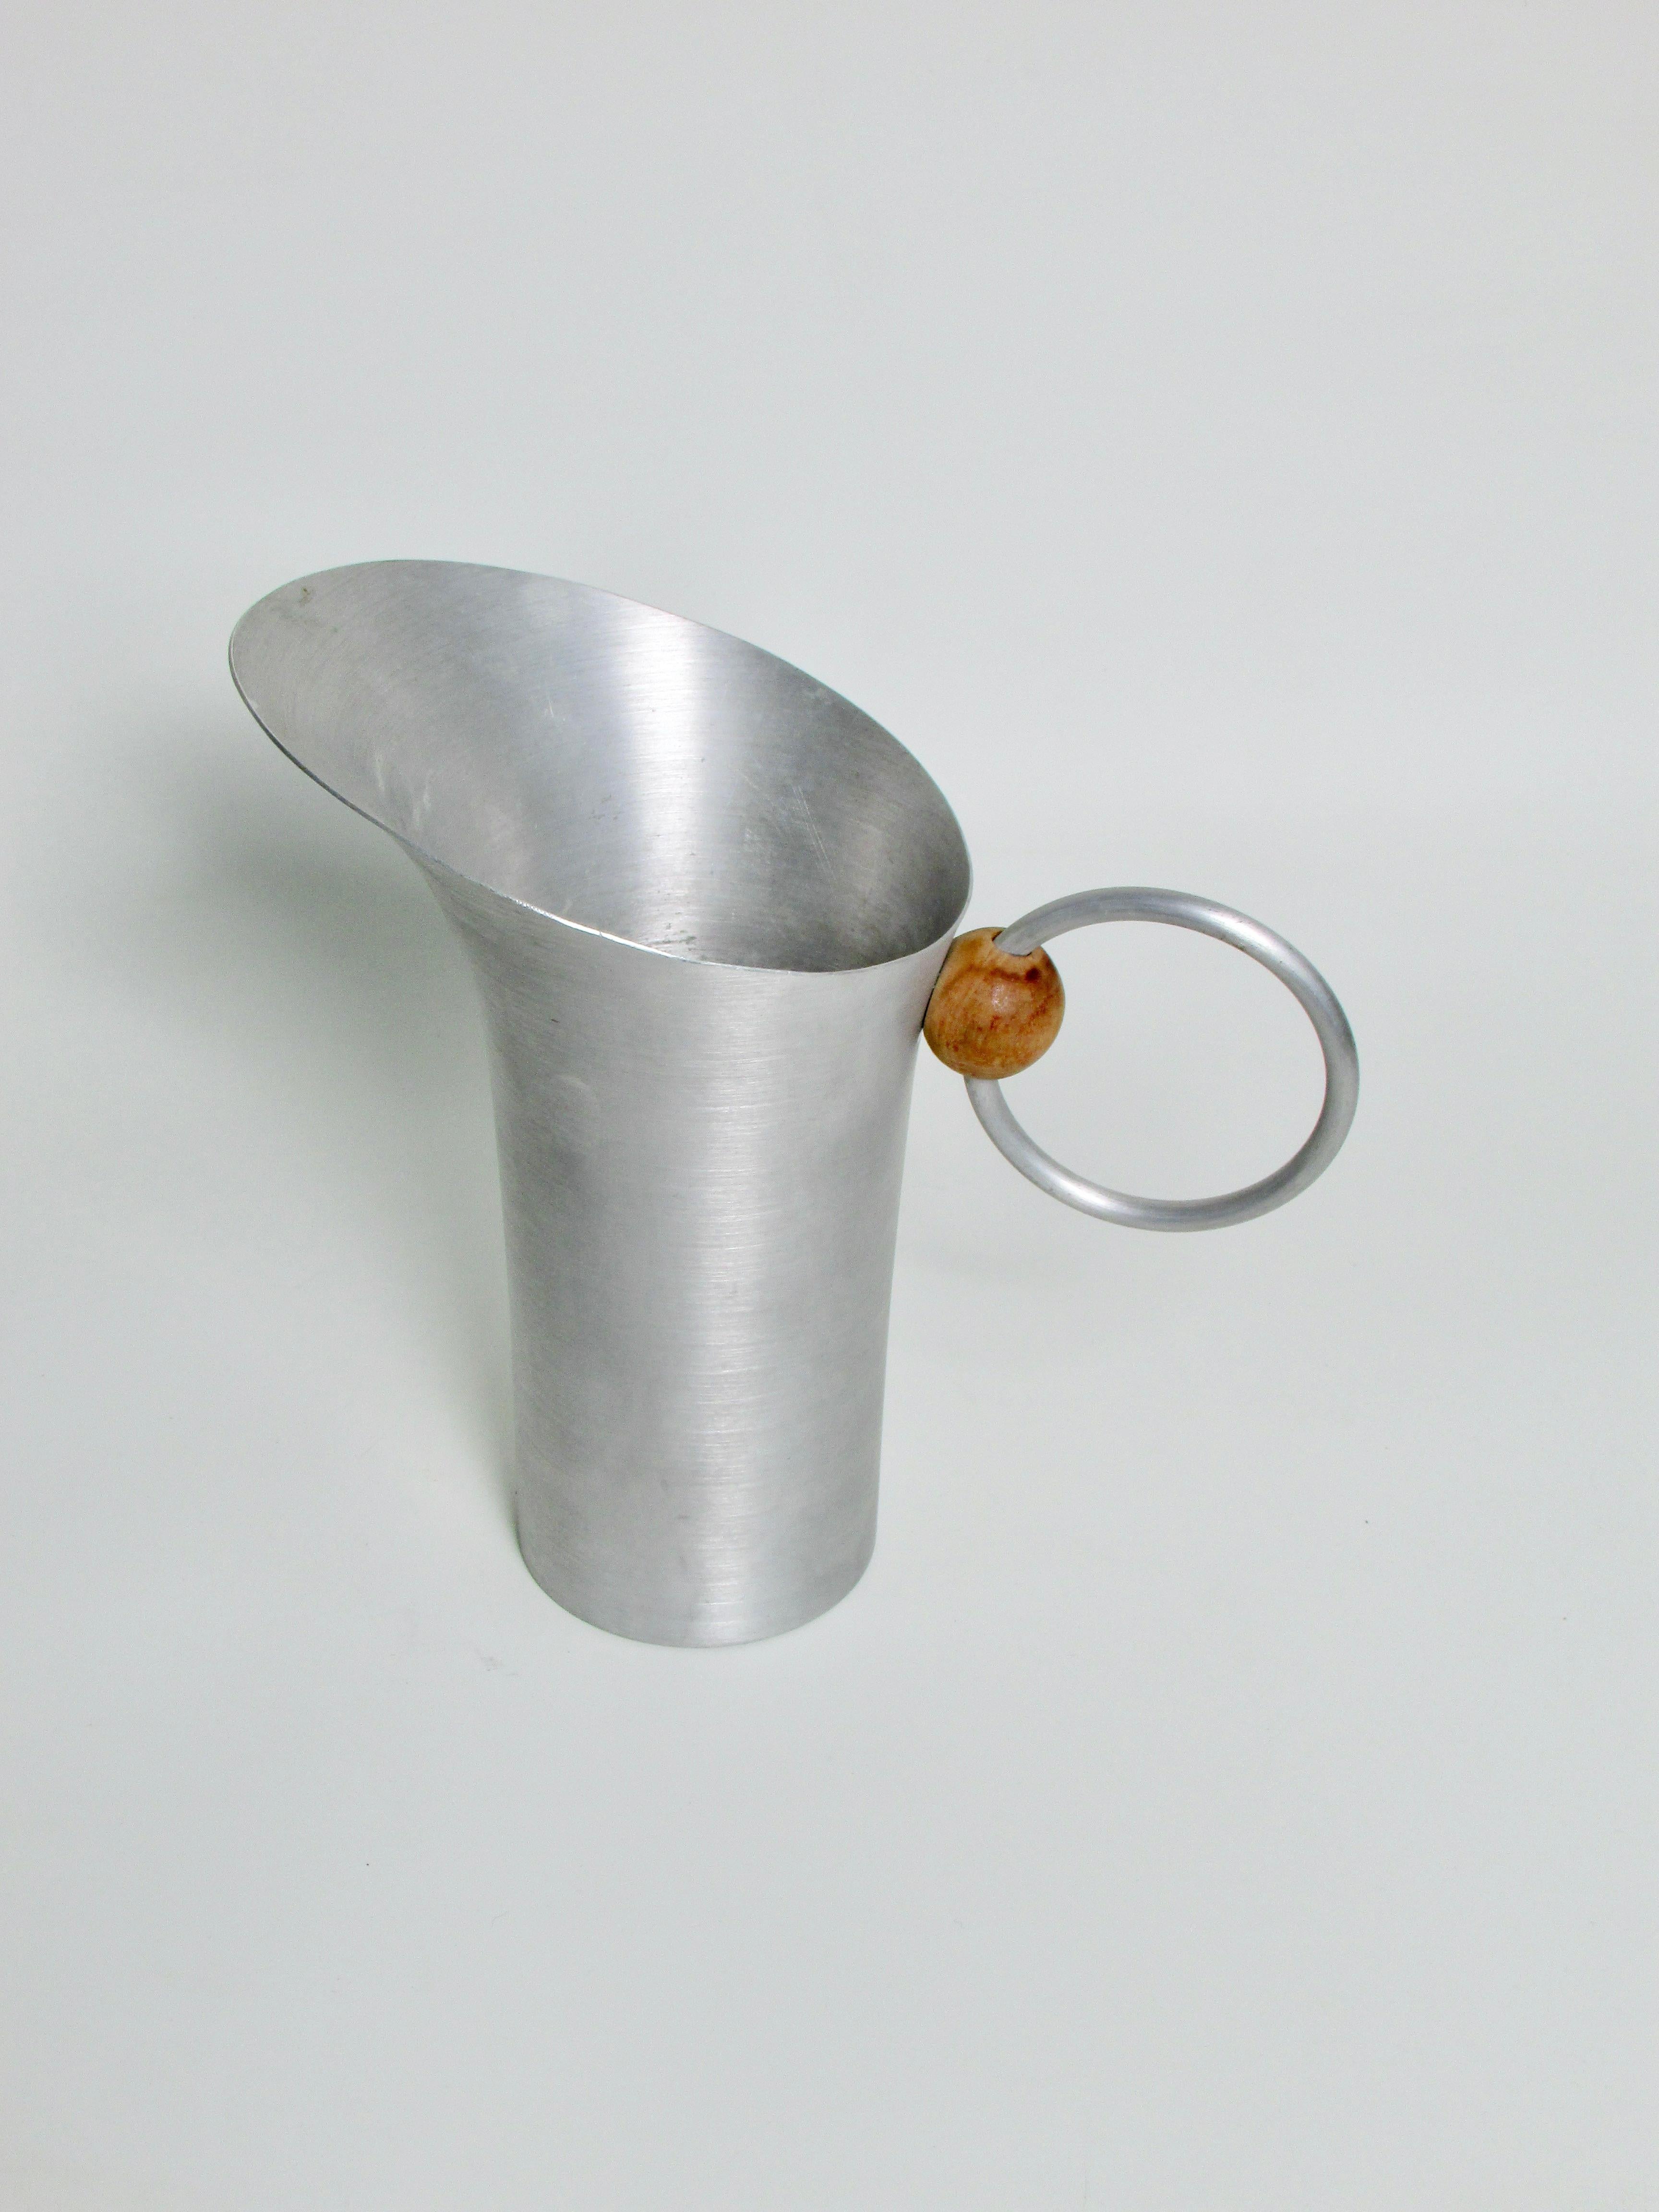 More sculpture than utilitarian object . Water or drinks pitcher . Nicely proportioned with aluminum ring handle through wood ball . Designed by  one of the leading mid century industrial designers Russel Wright . From his spun aluminum series .